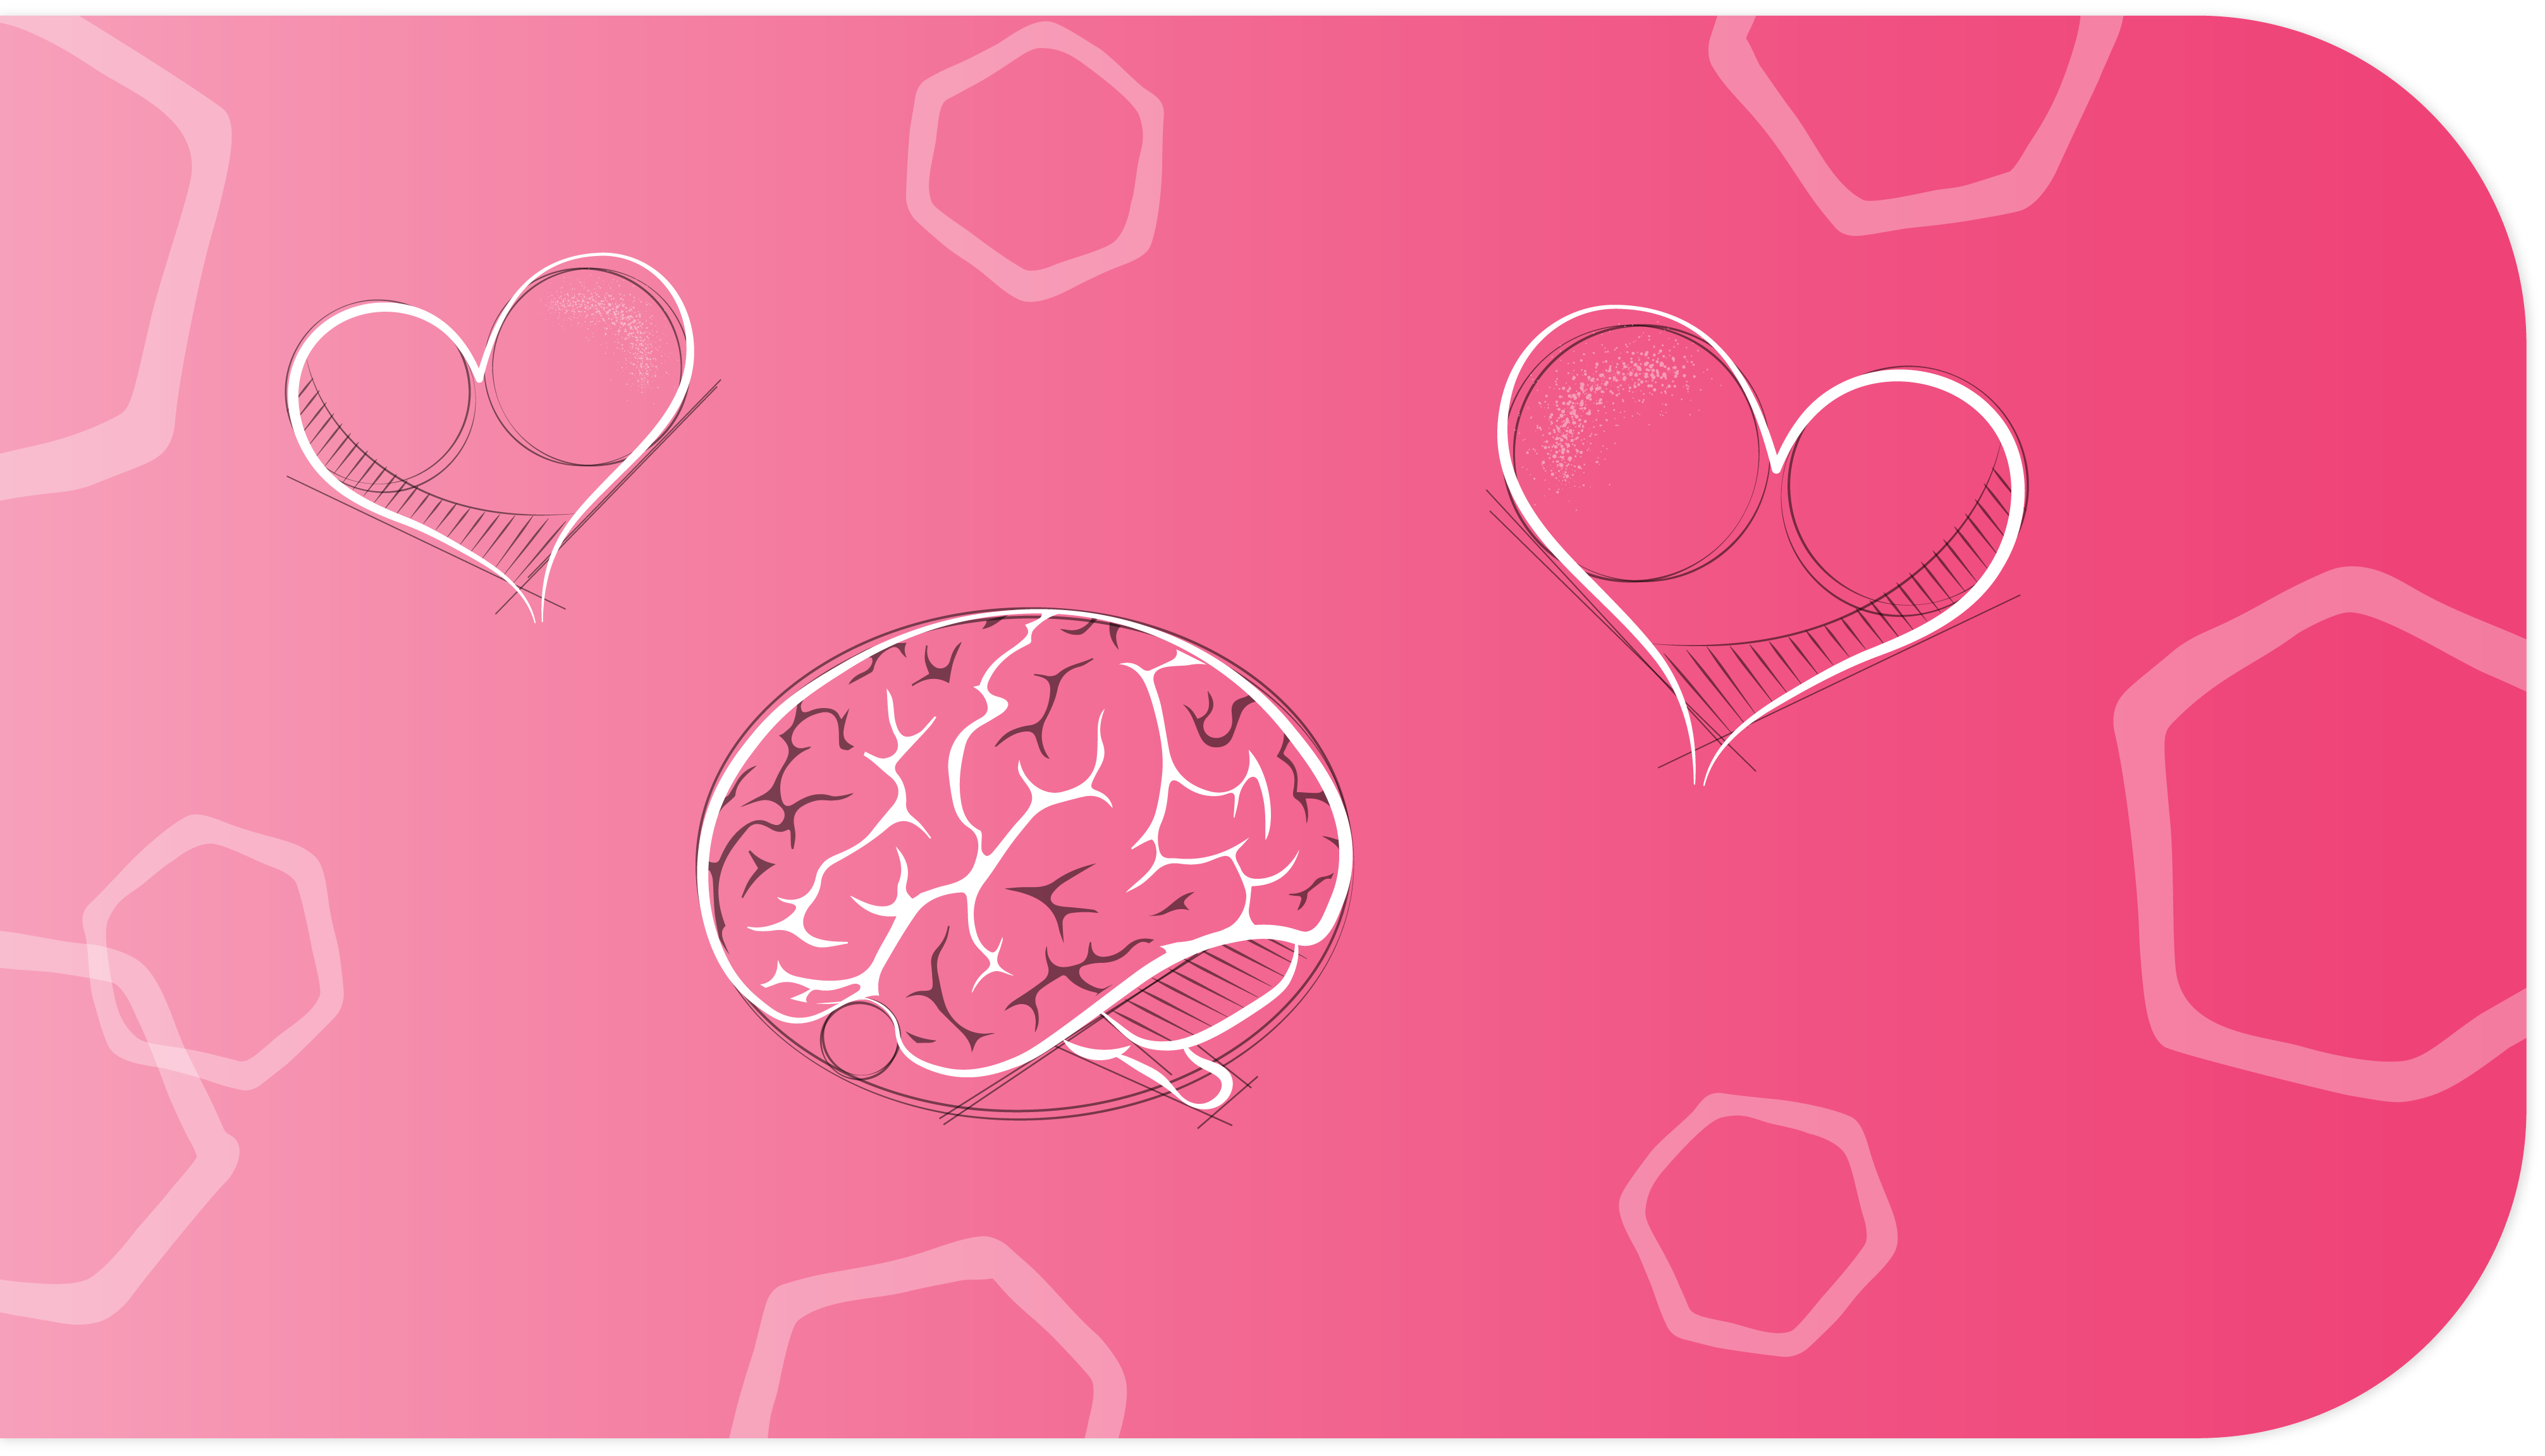 Chapter 1 banner indicating the start of a new chapter. Pink background with one brain and two heart icons.